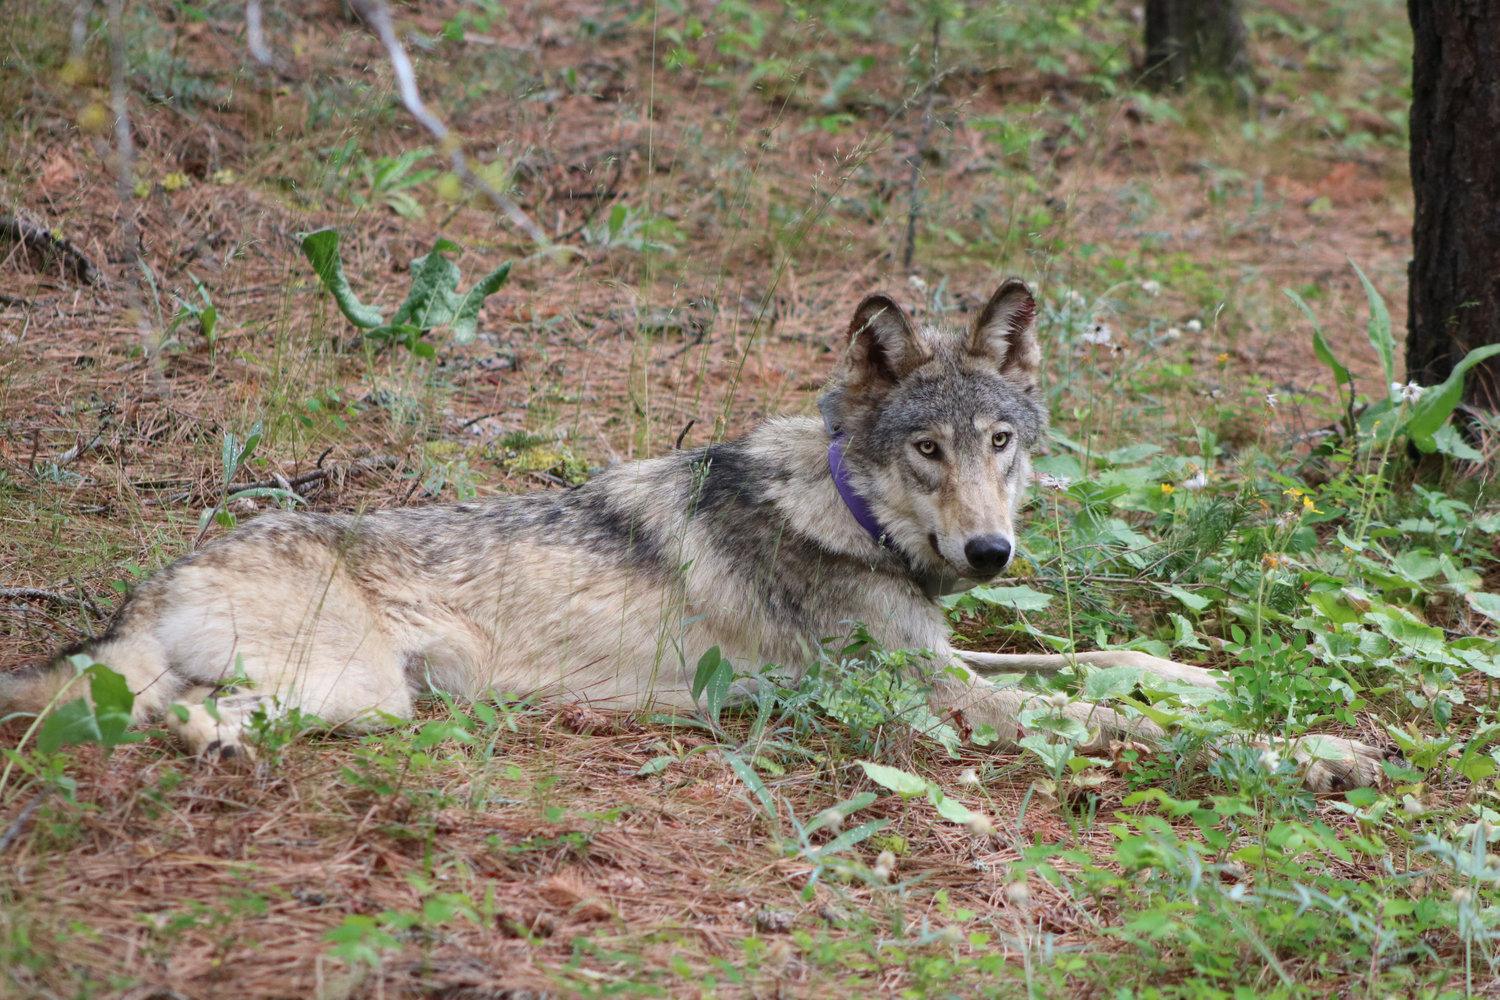 The gray wolf OR-93, shown near Yosemite National Park in February, traveled from Oregon to Southern California in search of territory and female mates. OR-93 was struck and killed this month in a vehicle accident near Interstate 5 in Lebec in Kern County. (Austin Smith/Confederated Tribes of Warm Springs/TNS)